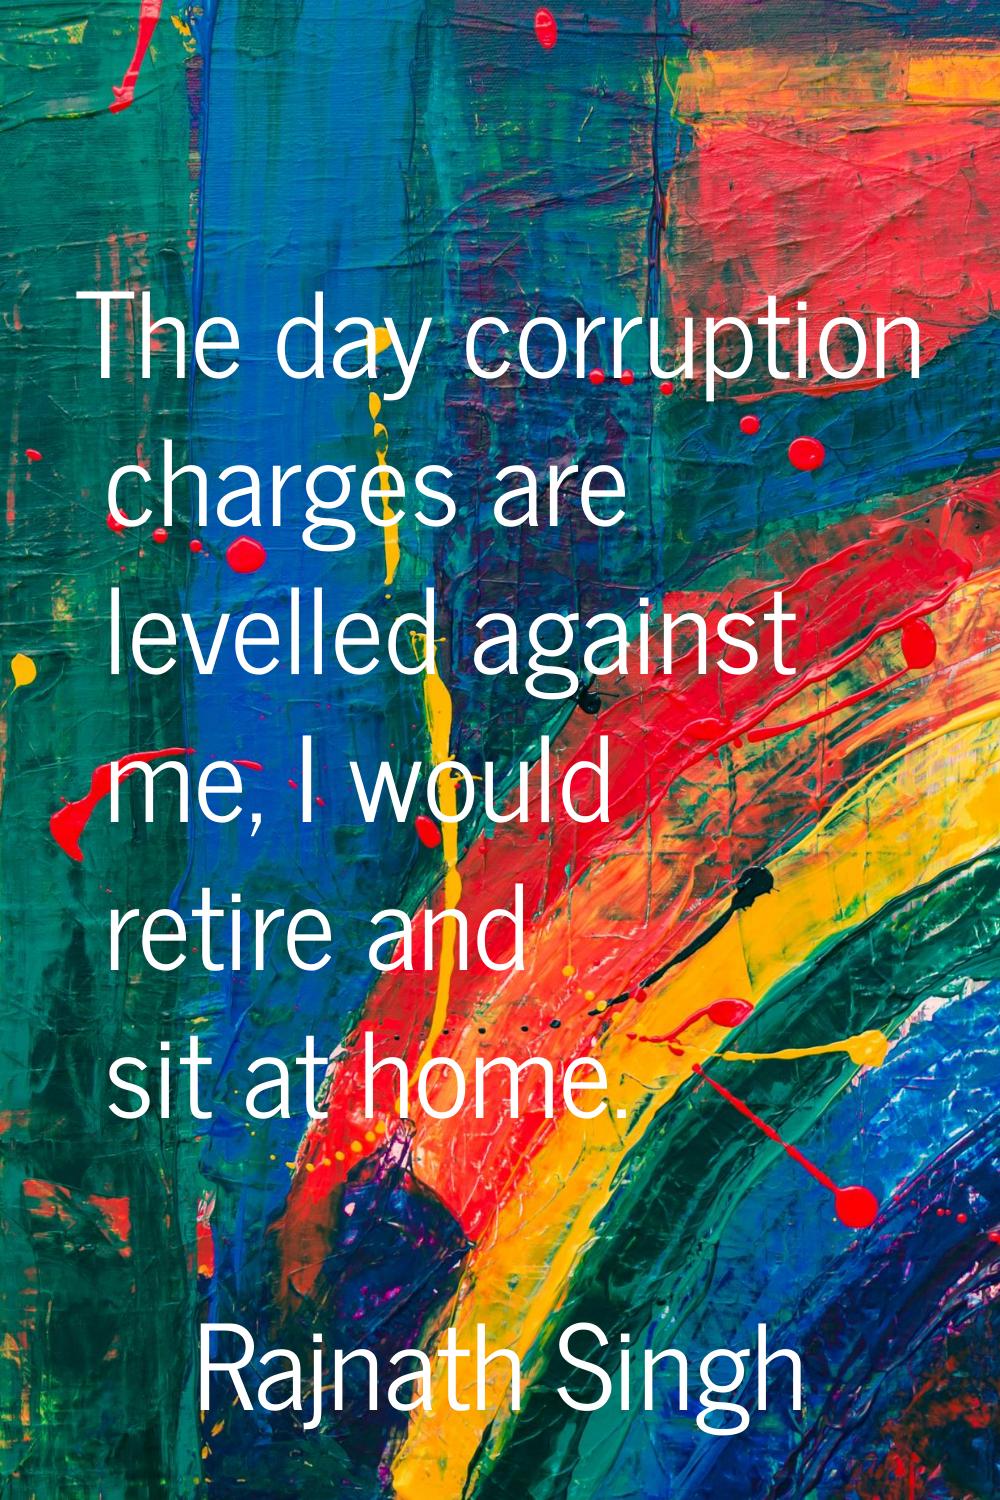 The day corruption charges are levelled against me, I would retire and sit at home.